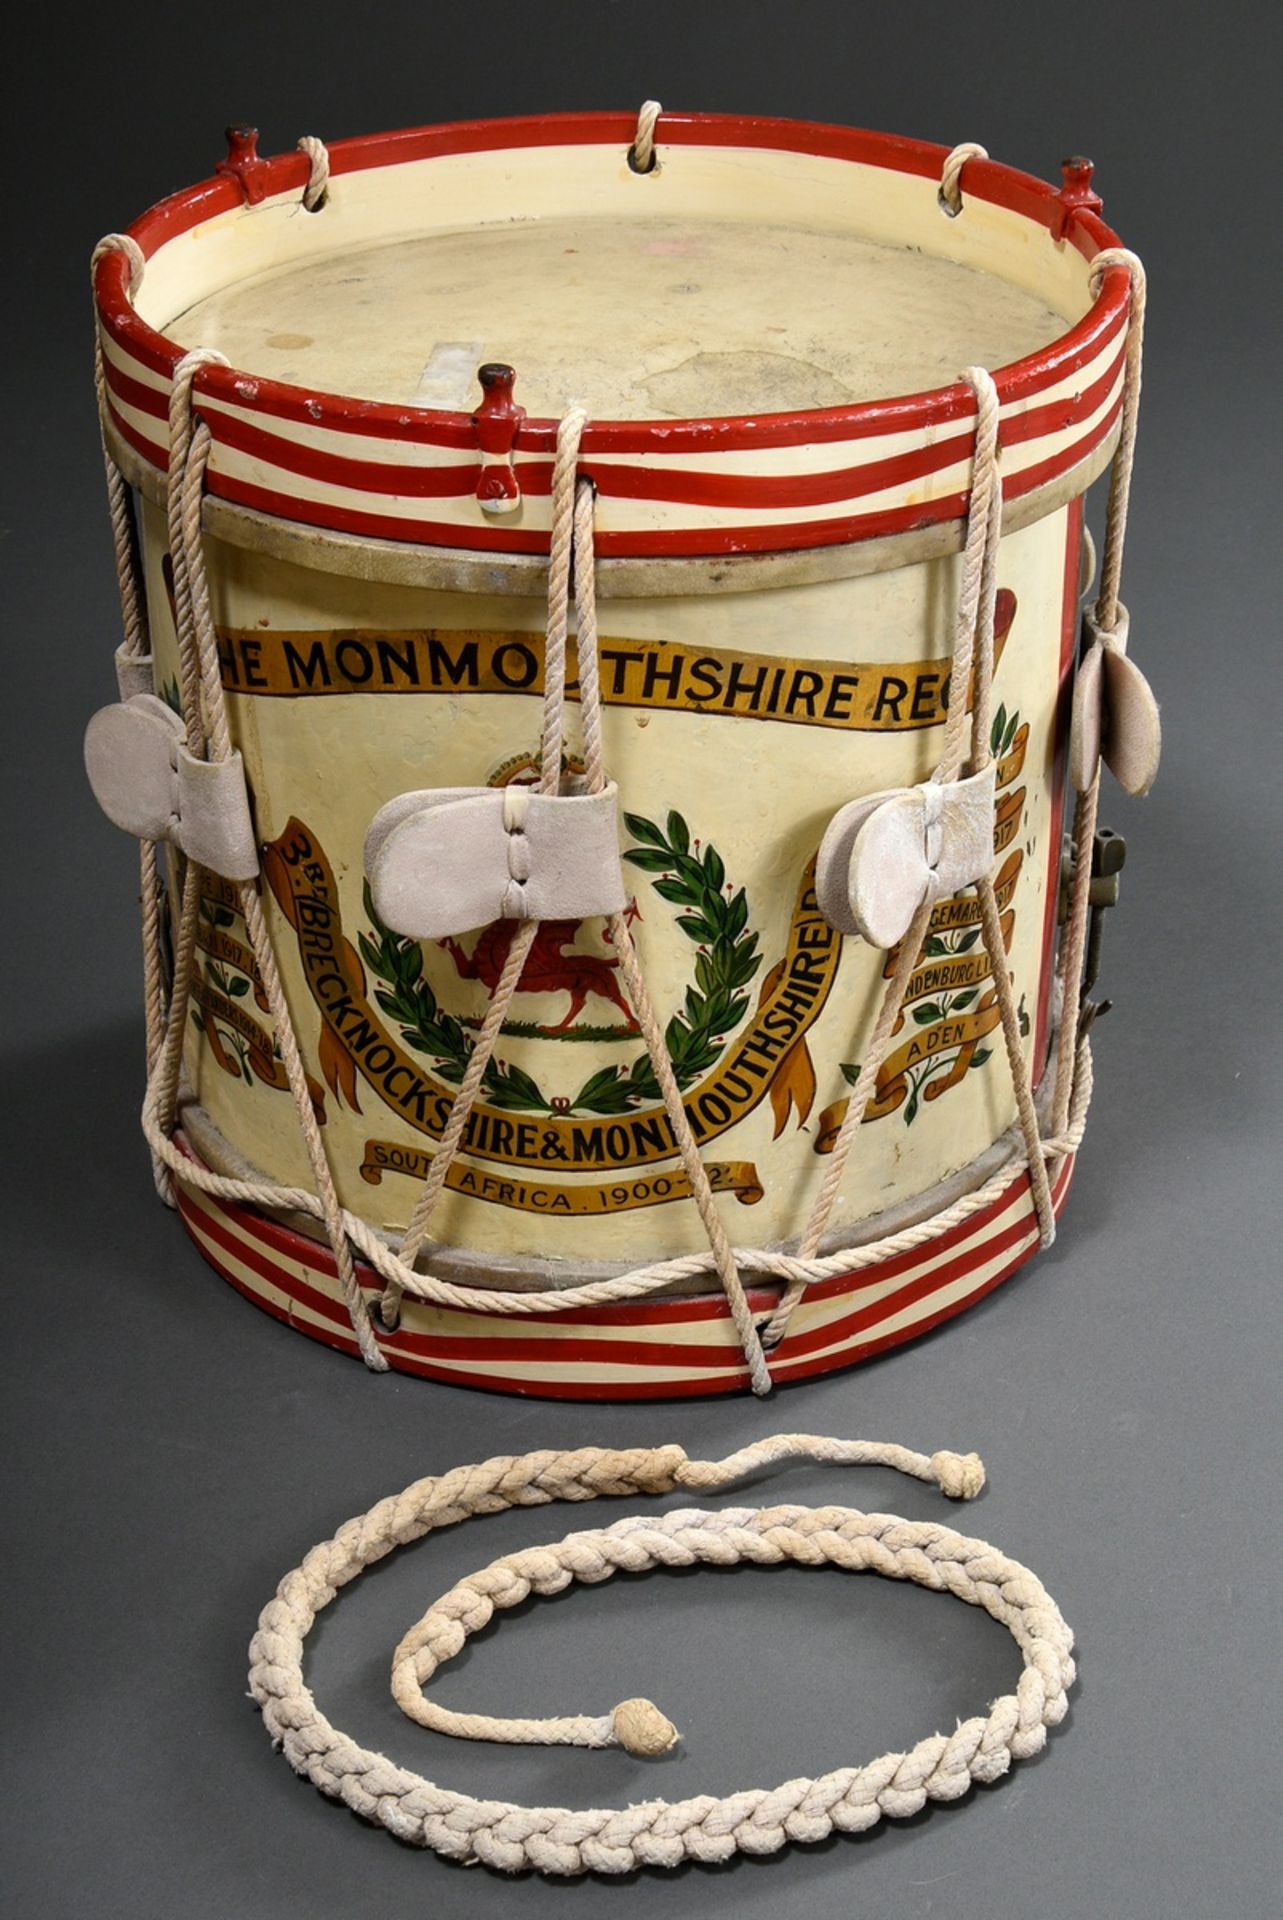 English regimental drum "The Monmouthshire Regiment", inscribed on the side: "Ypres 1915/17/18, Som